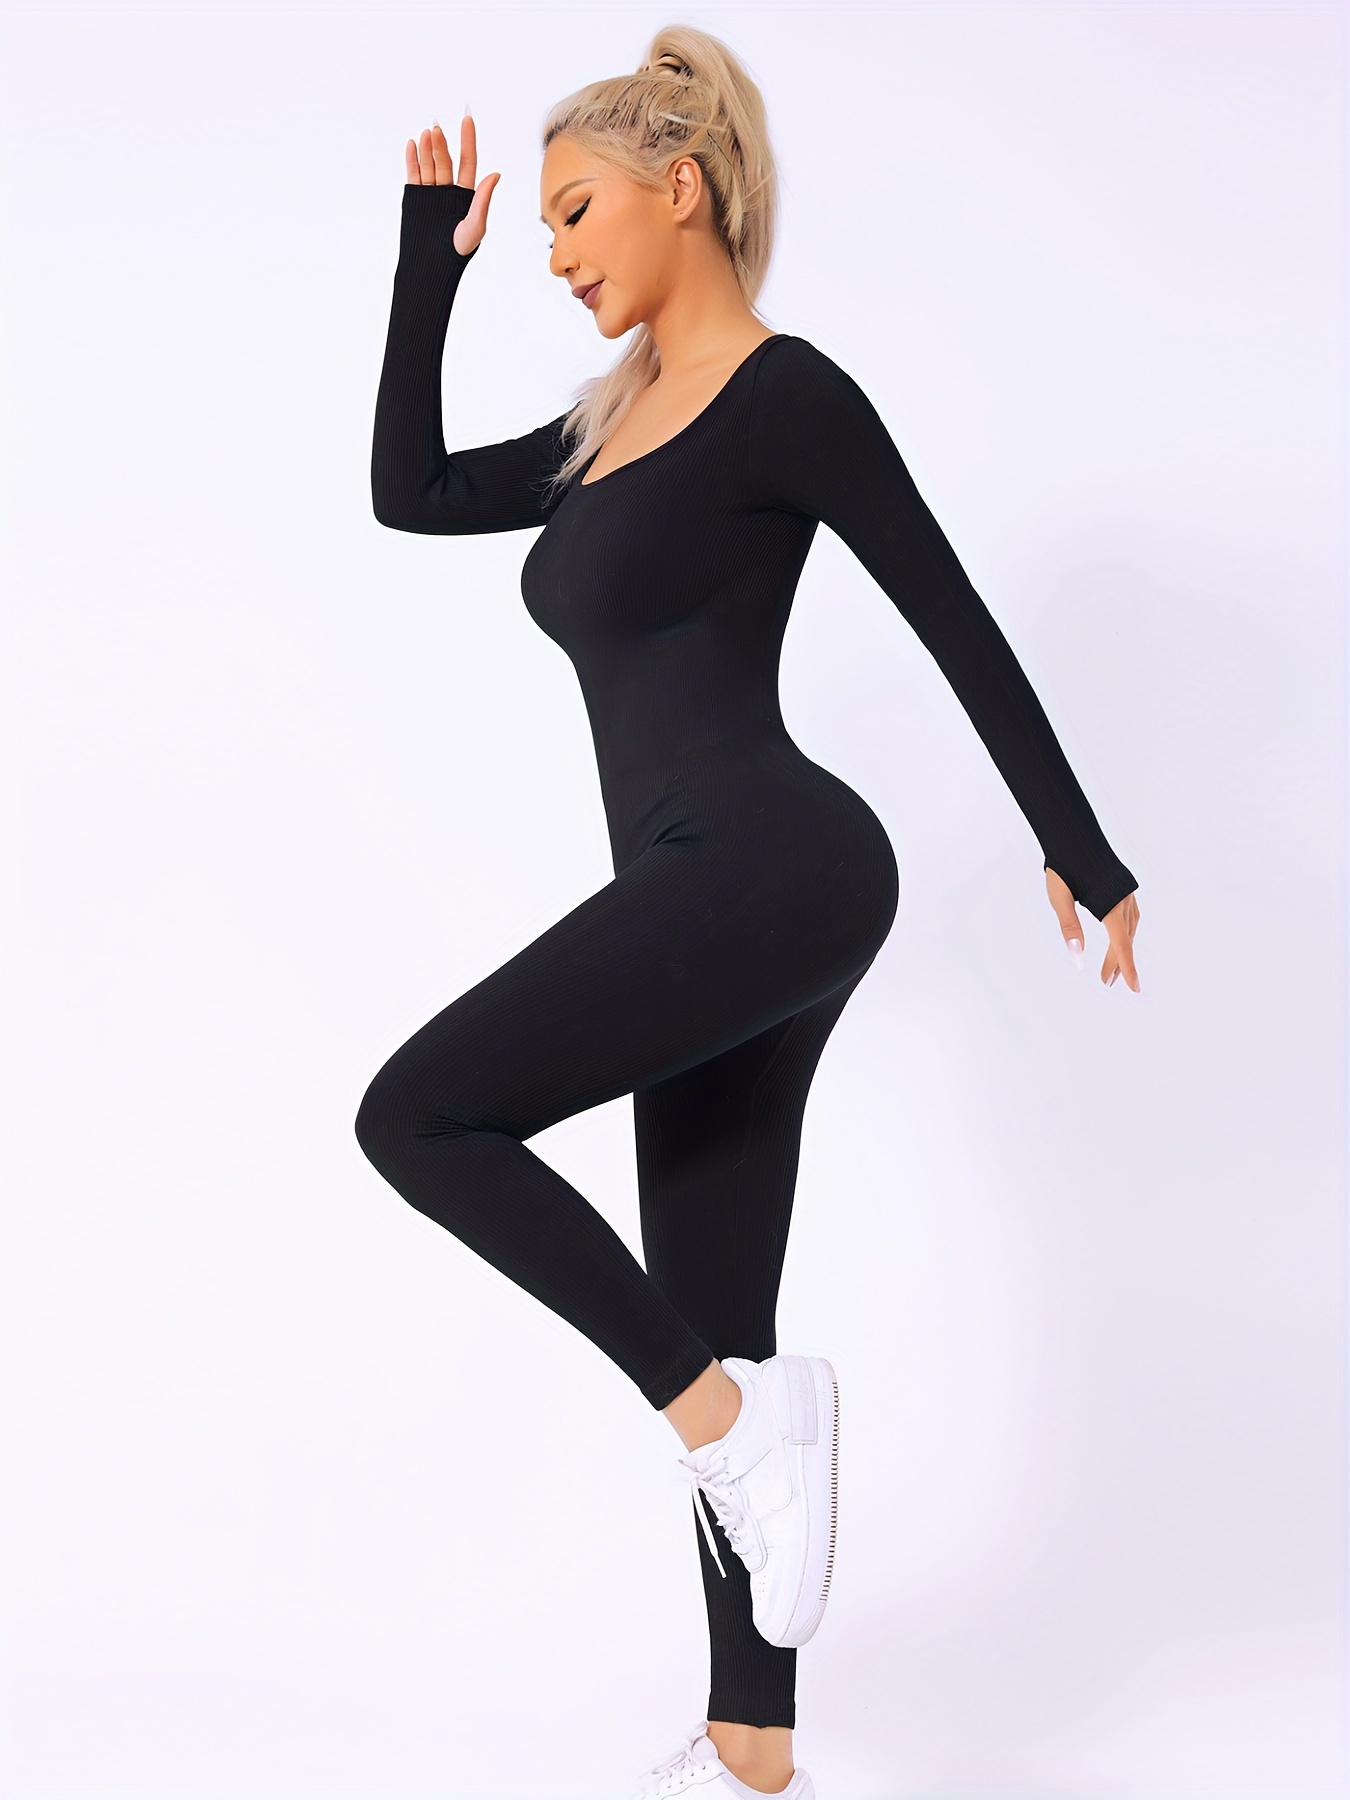 AONVE Female Bodysuit Jumpsuit Sexy Outfit Rompers Slimming Legs Tummy  Control Butt Lifter Adjustable Shoulder Straps Shapewear - AliExpress